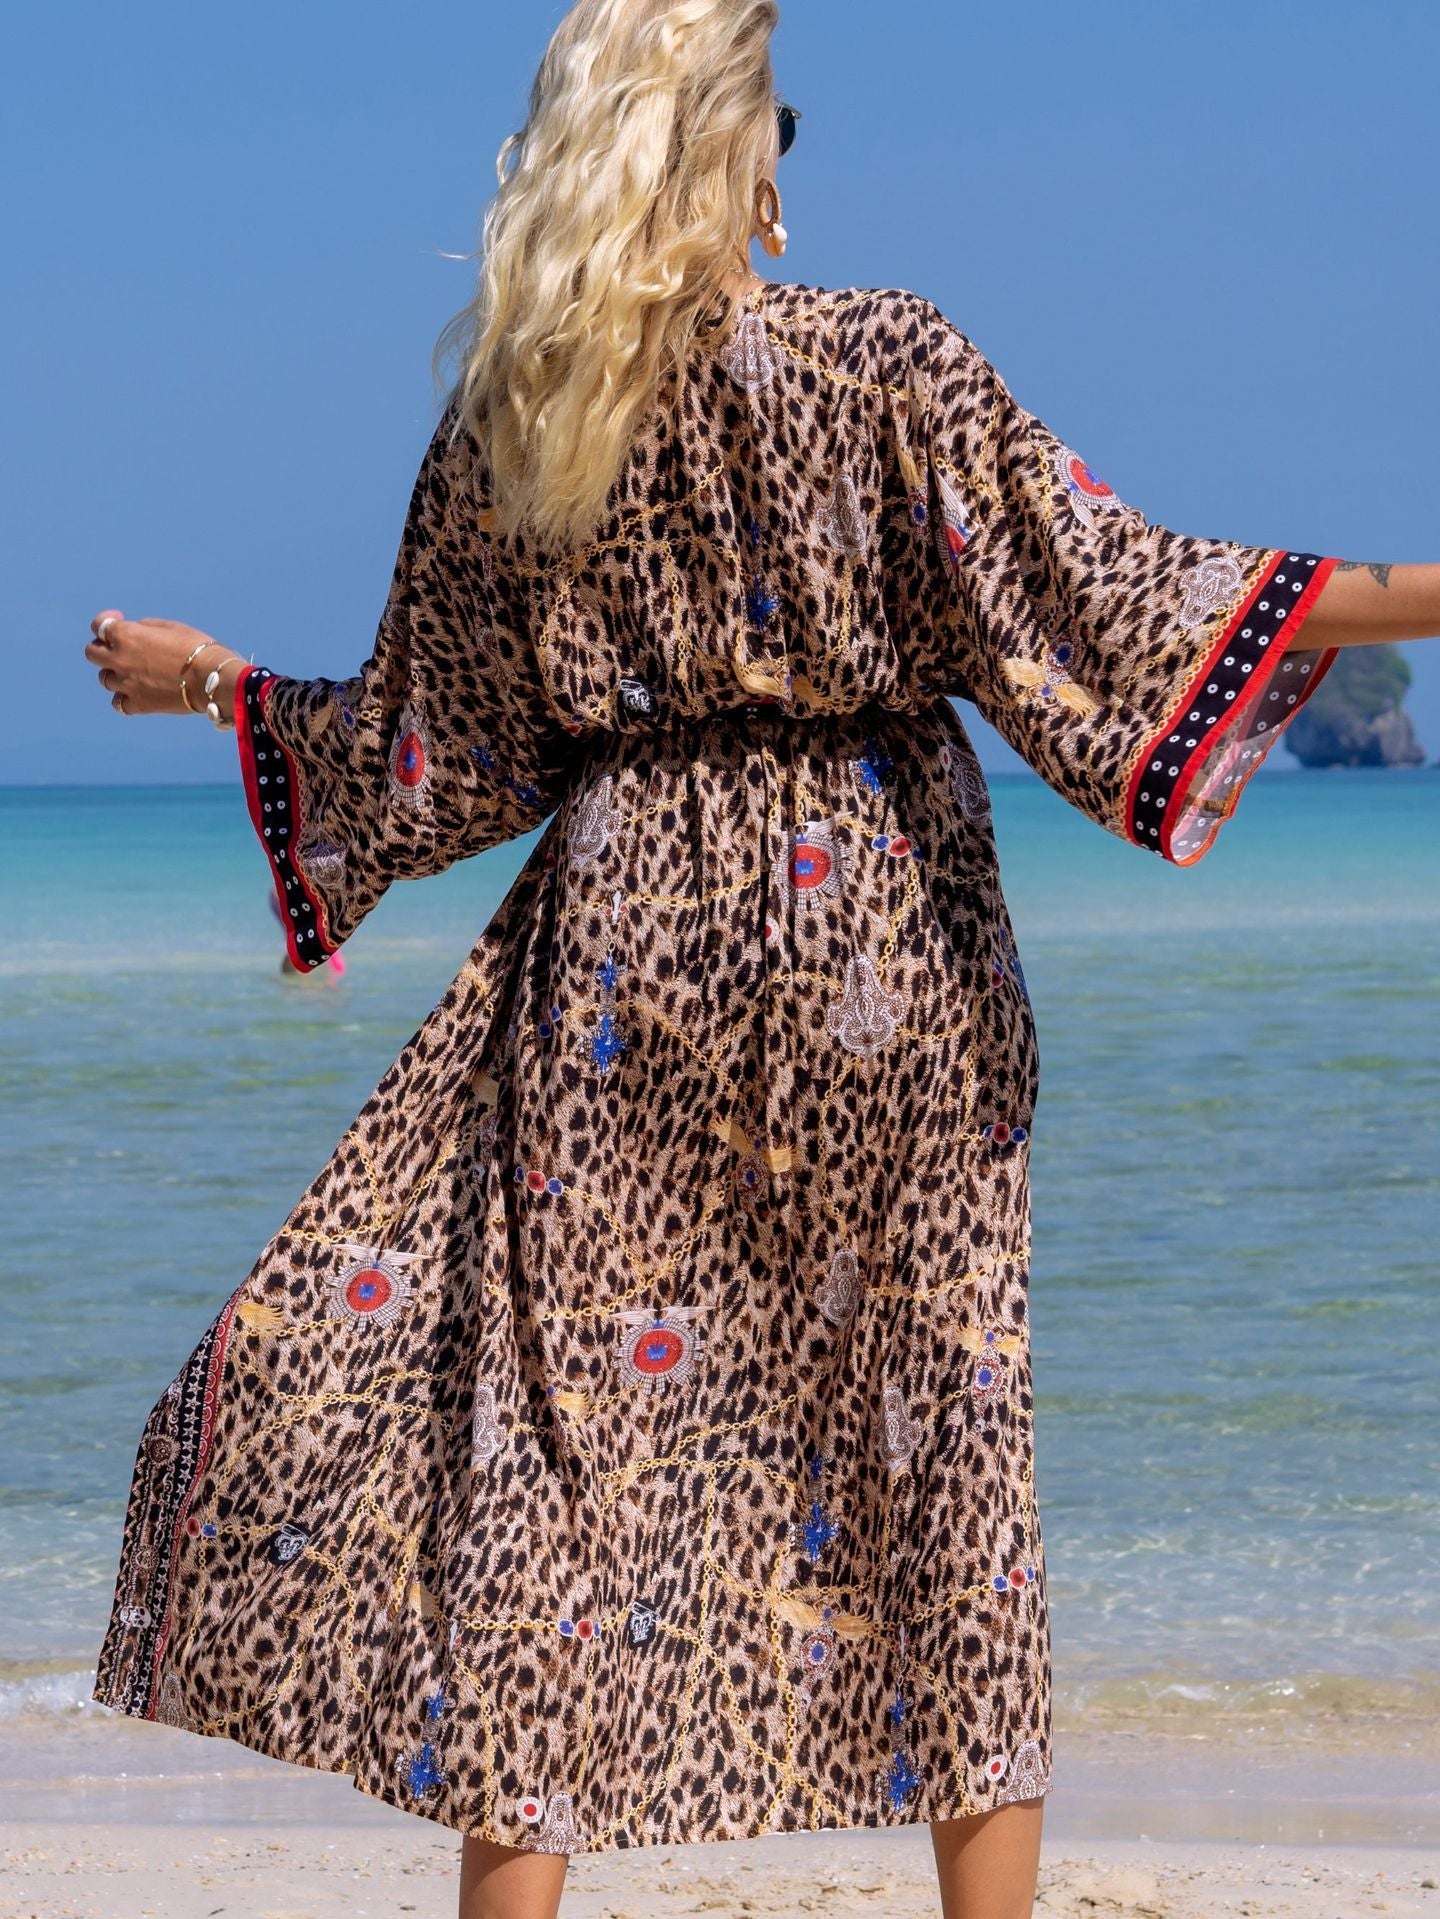 Fashion Floral Print Summer Kimono Beachwear Cover Ups-Leopard Chain-One Size-Free Shipping at meselling99